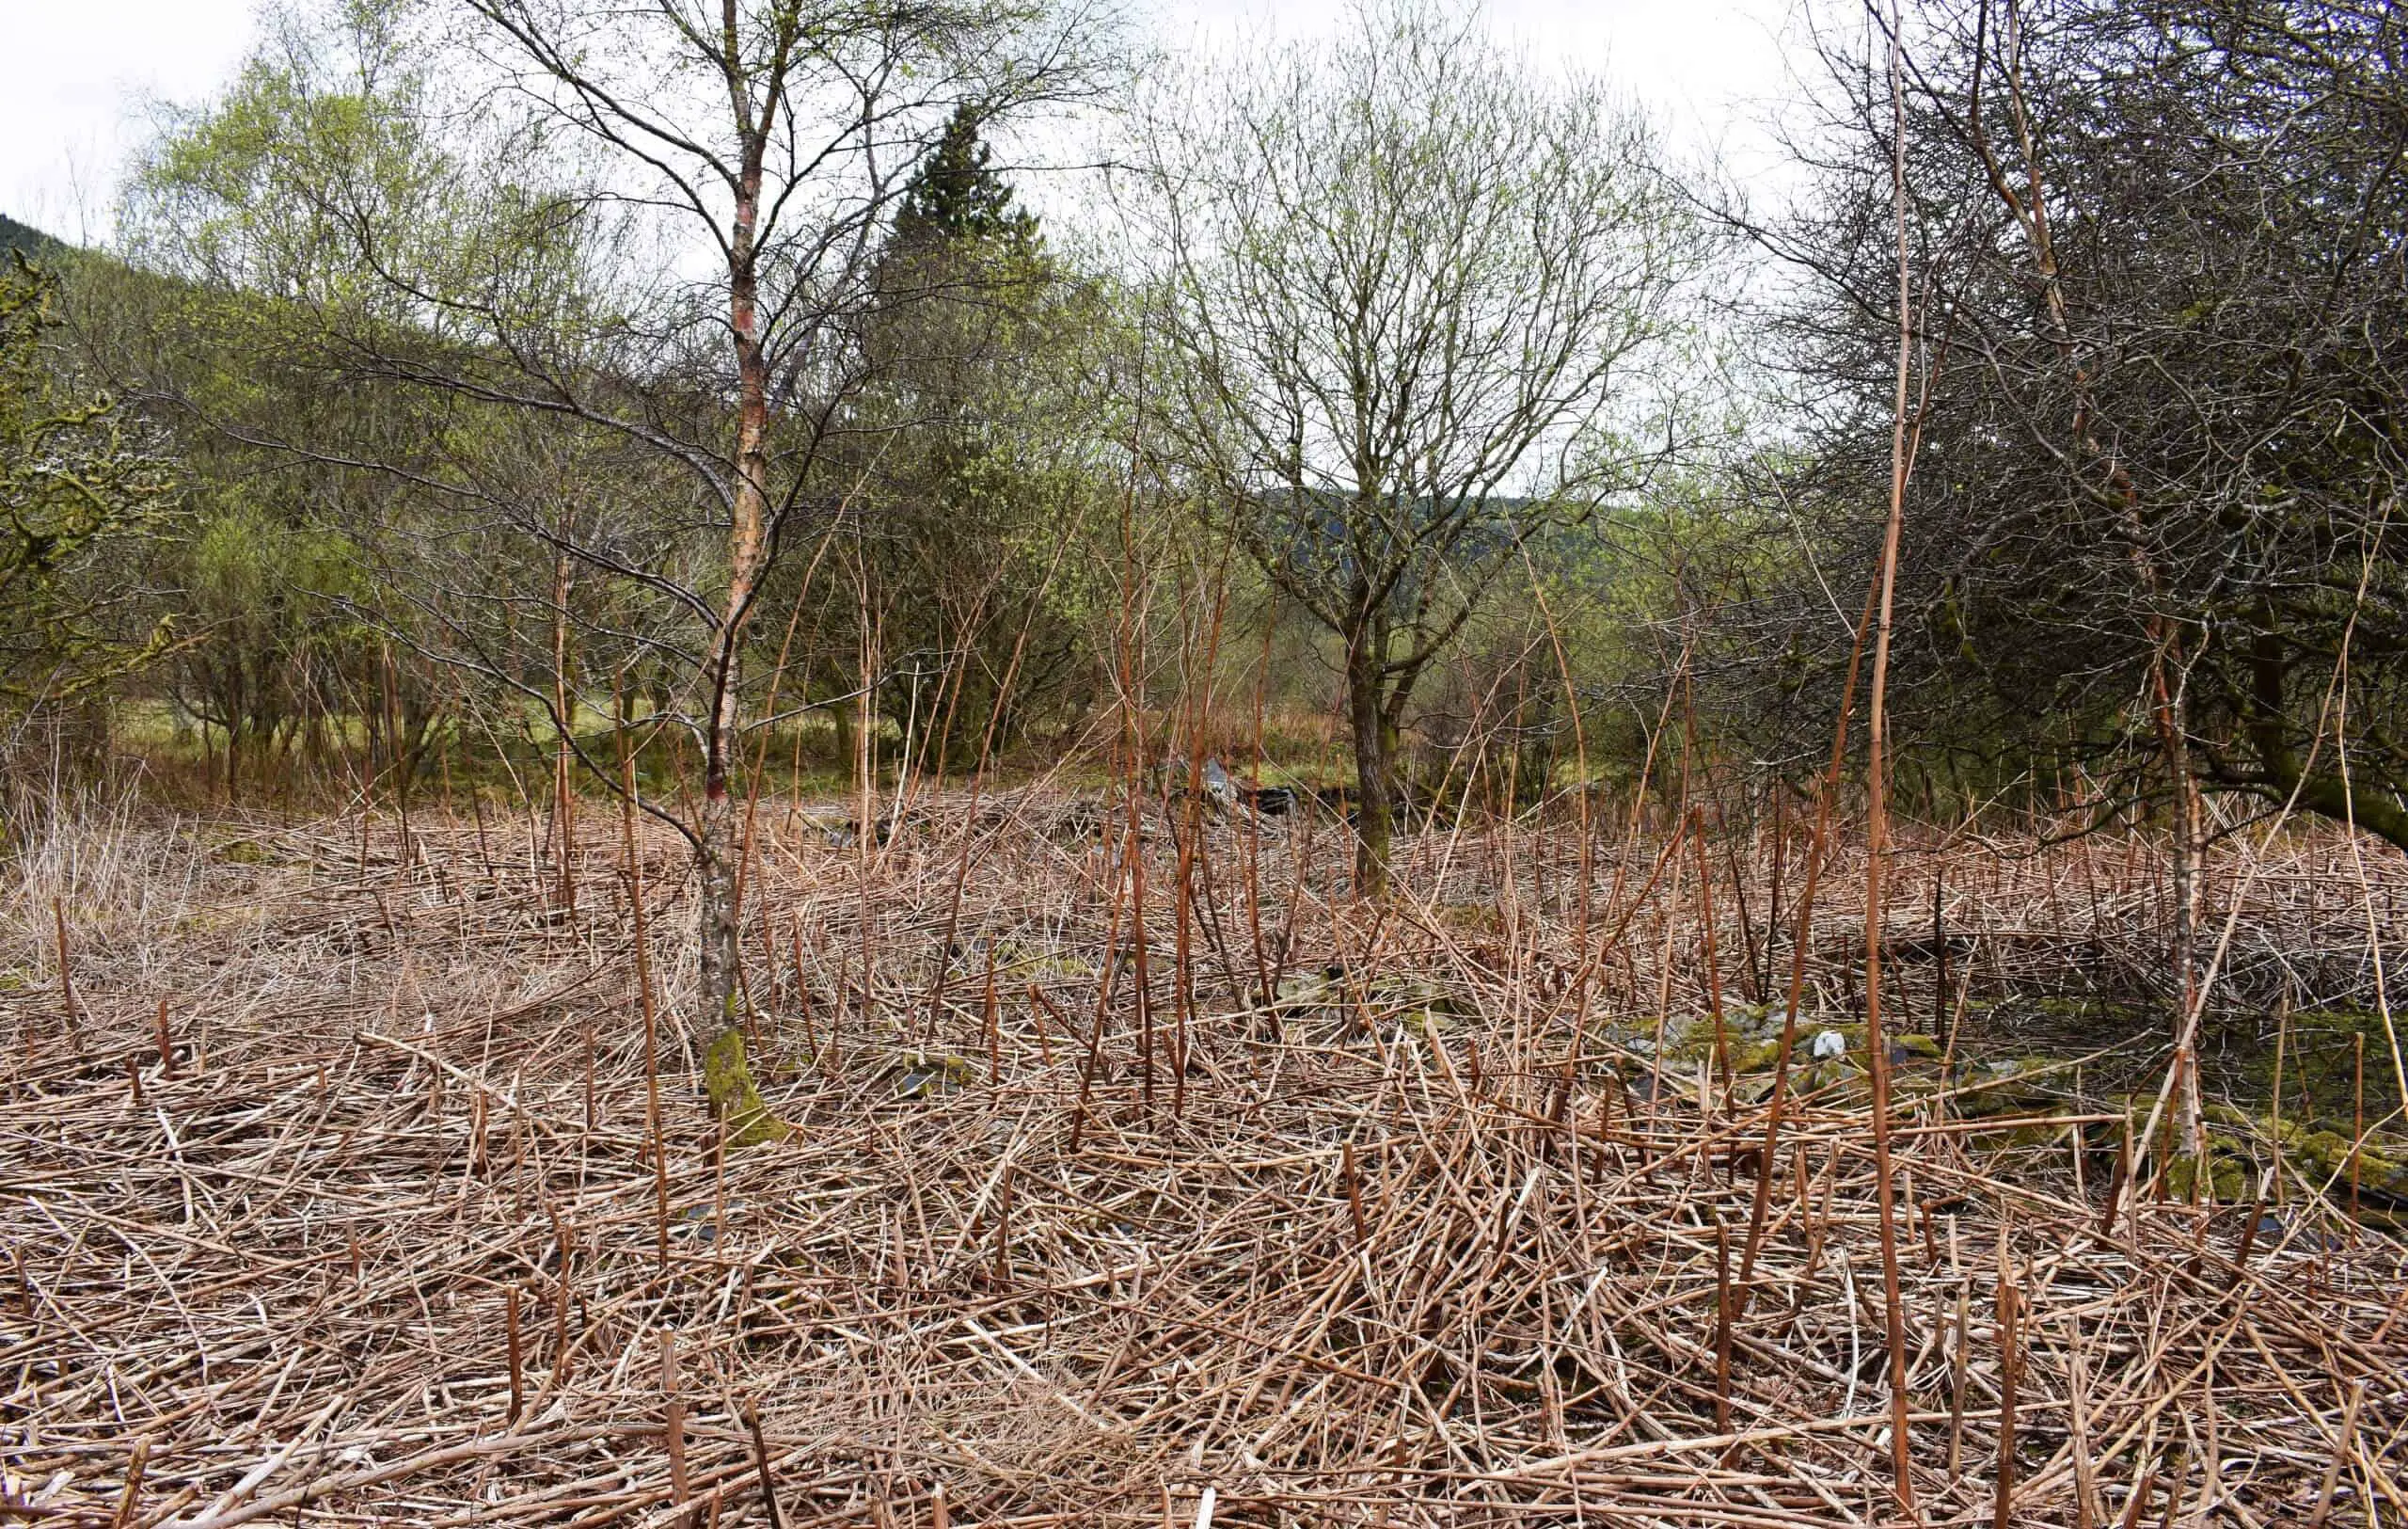 Japanese knotweed dies right back in the winter but is not dead as the rhizomes stay alive for years scaled